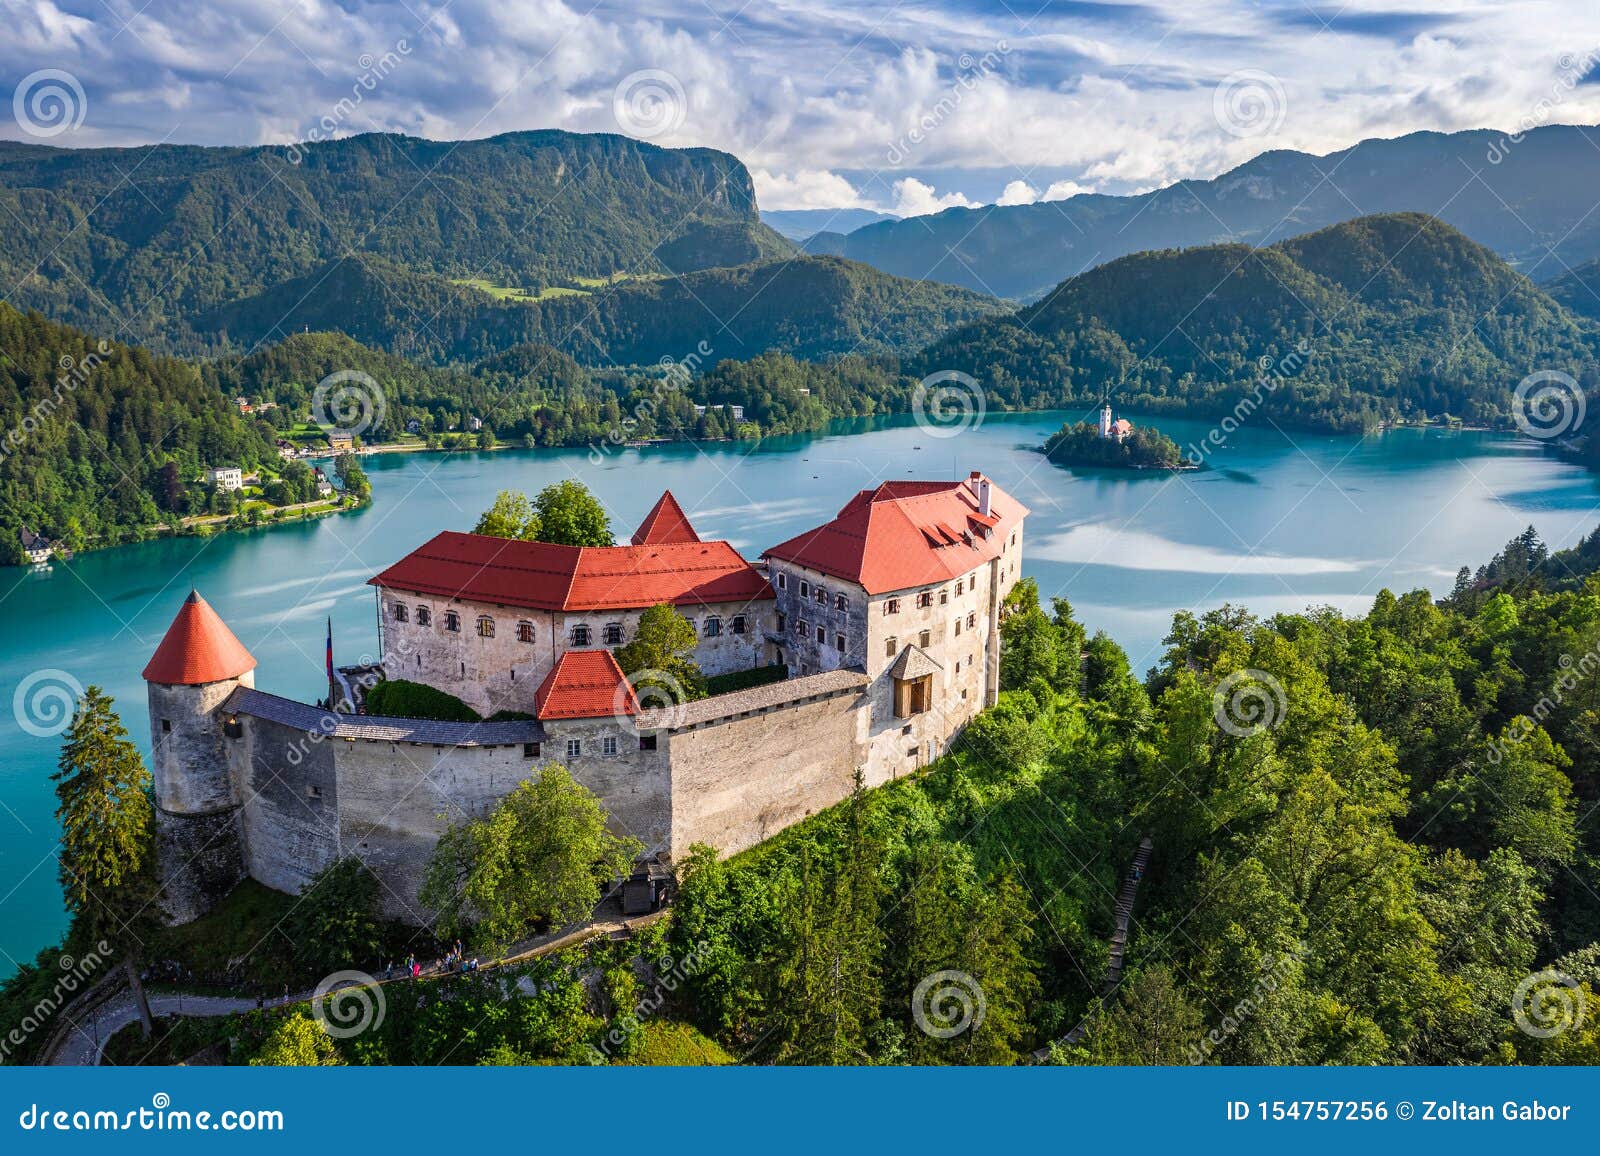 bled, slovenia - aerial view of beautiful bled castle blejski grad with lake bled blejsko jezero on a bright summer day